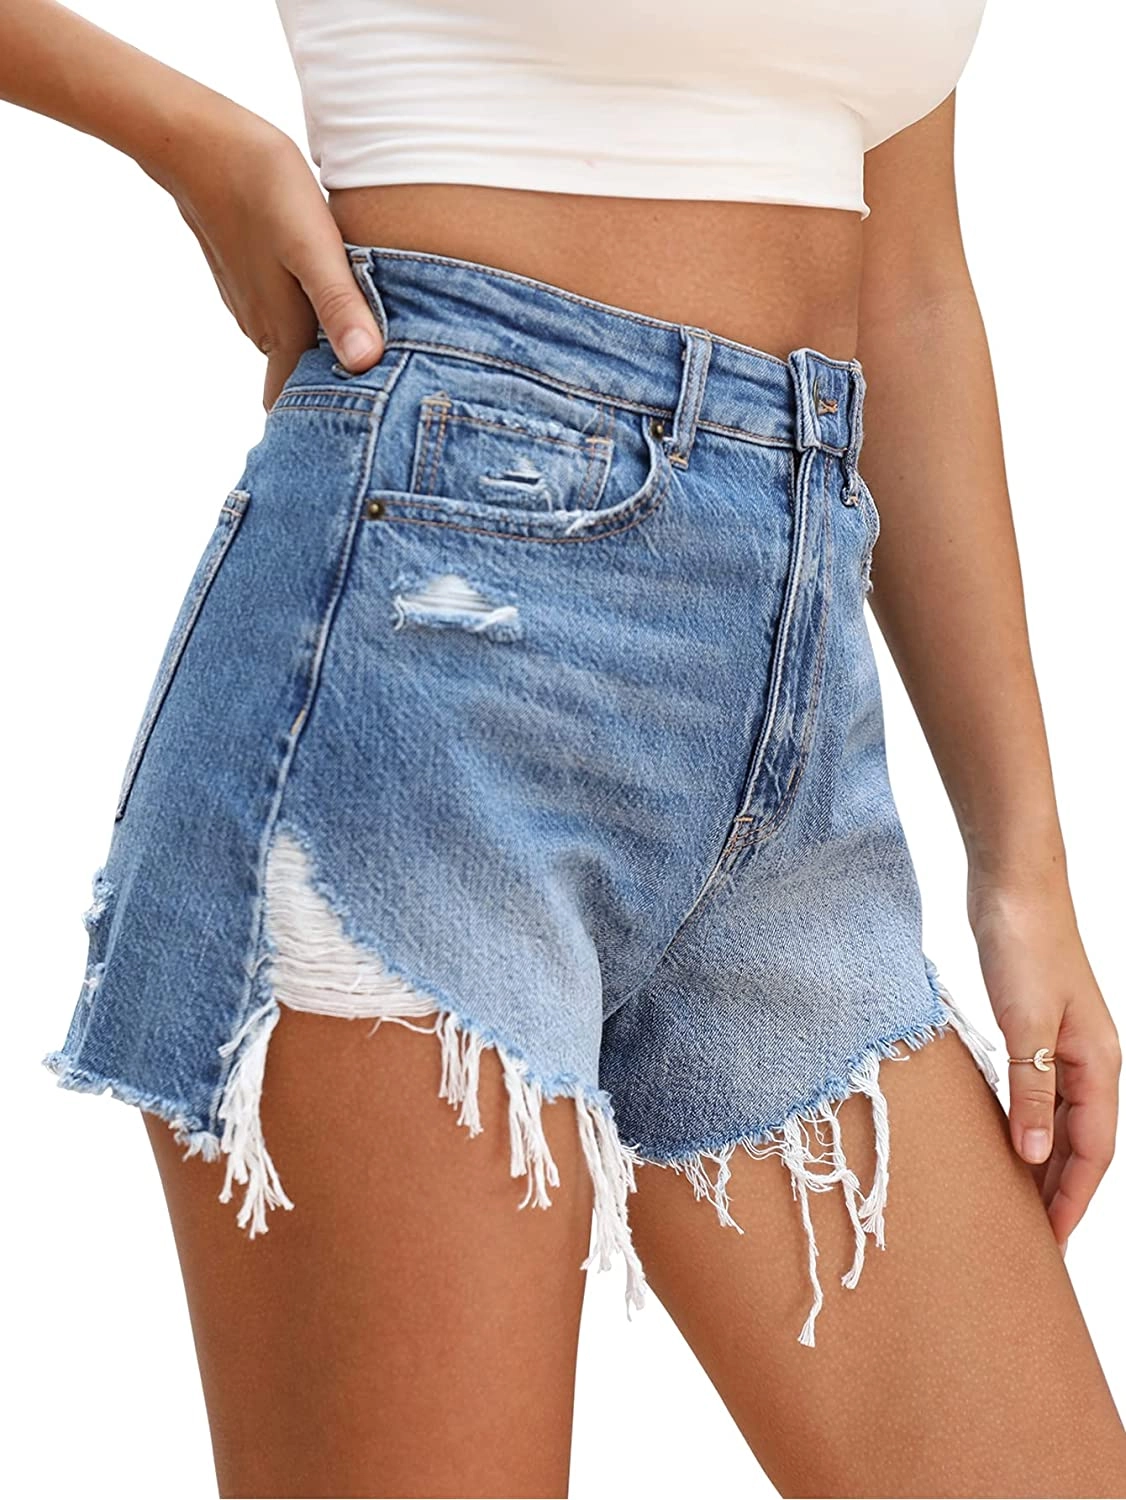 Womens High Waisted Jeans Shorts From Bangladesh Garments Factory